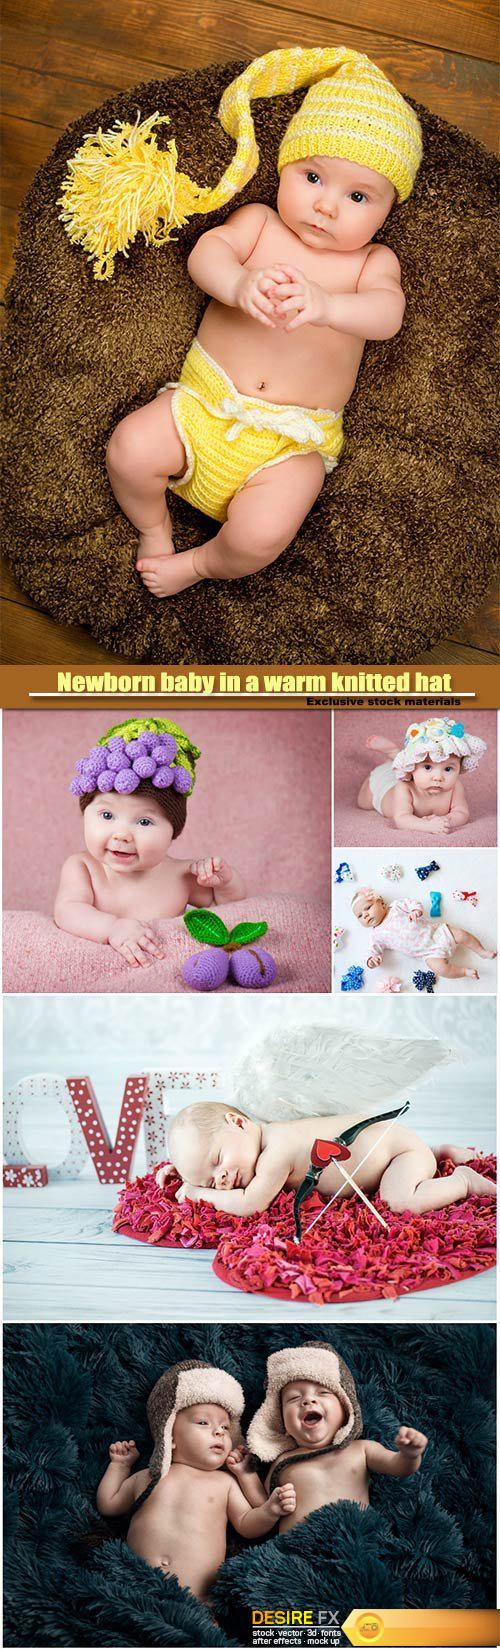 Newborn baby in a warm knitted hat, family, new life, beginning concept